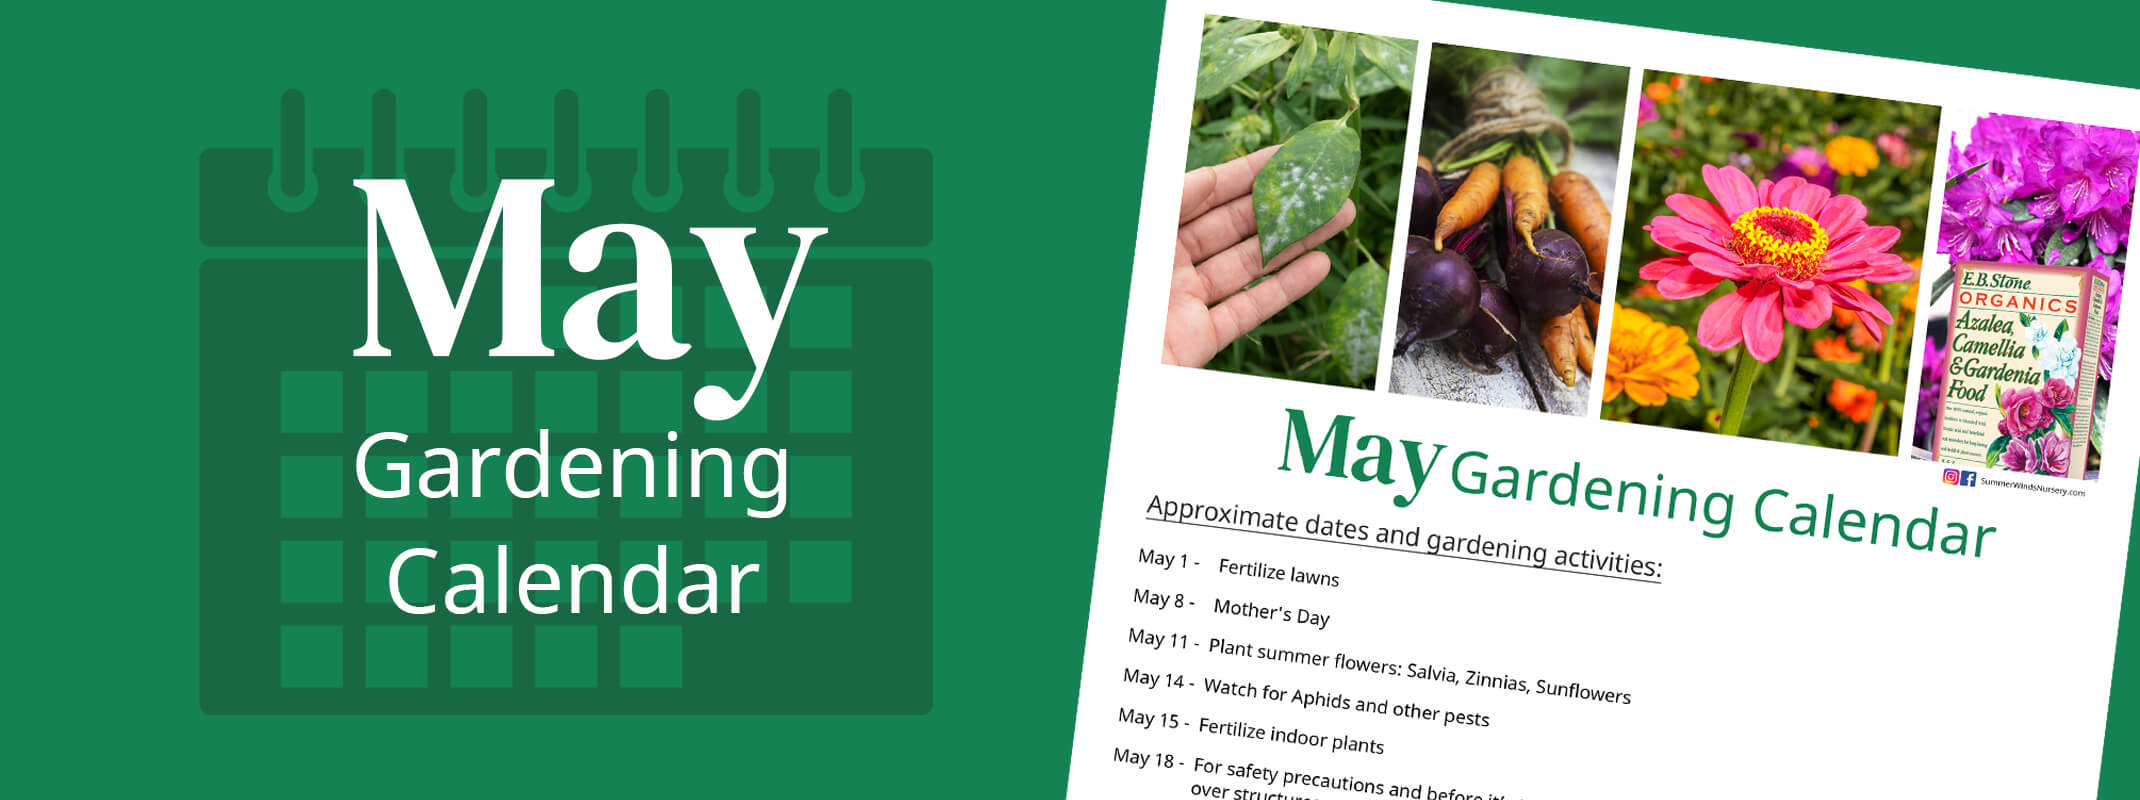 May gardening calendar with image of the calendar and the words May gardening calendar on it